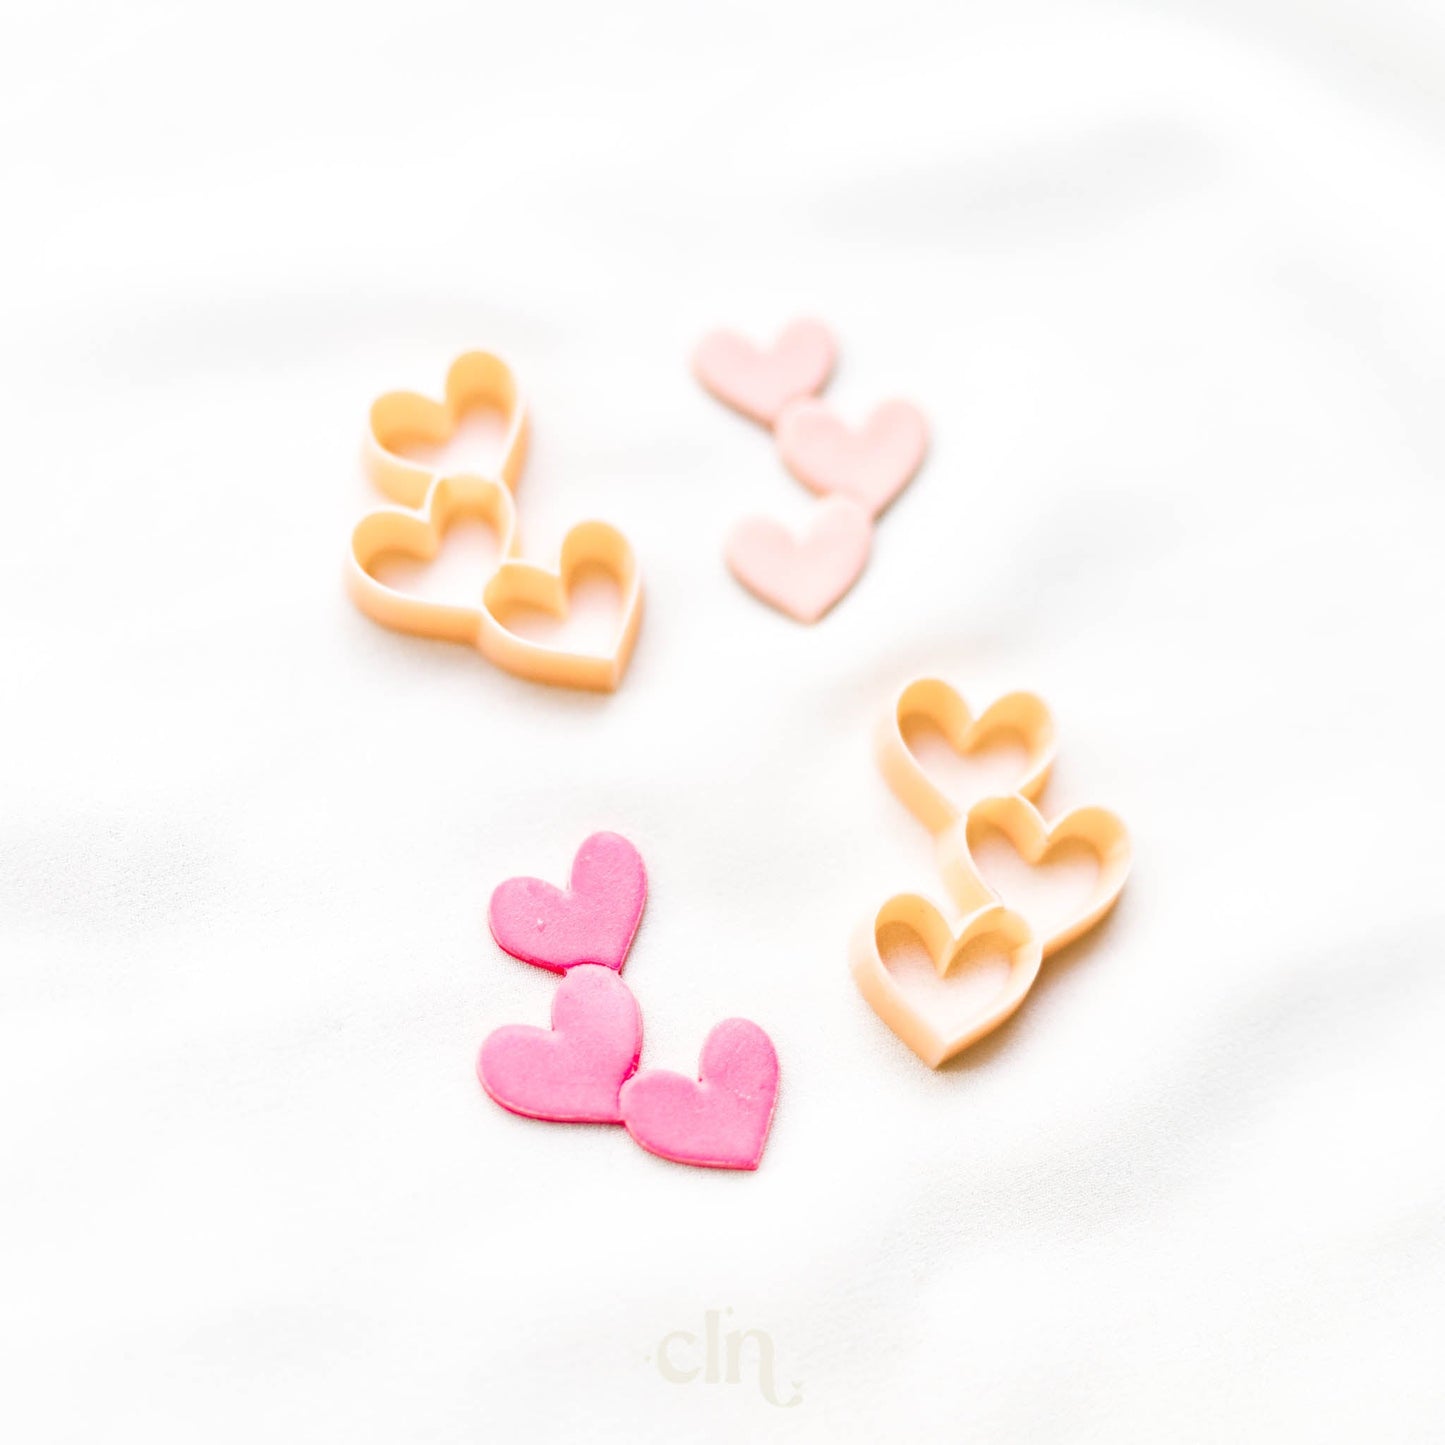 Embossed heart chain - Cutter - CLN Atelier